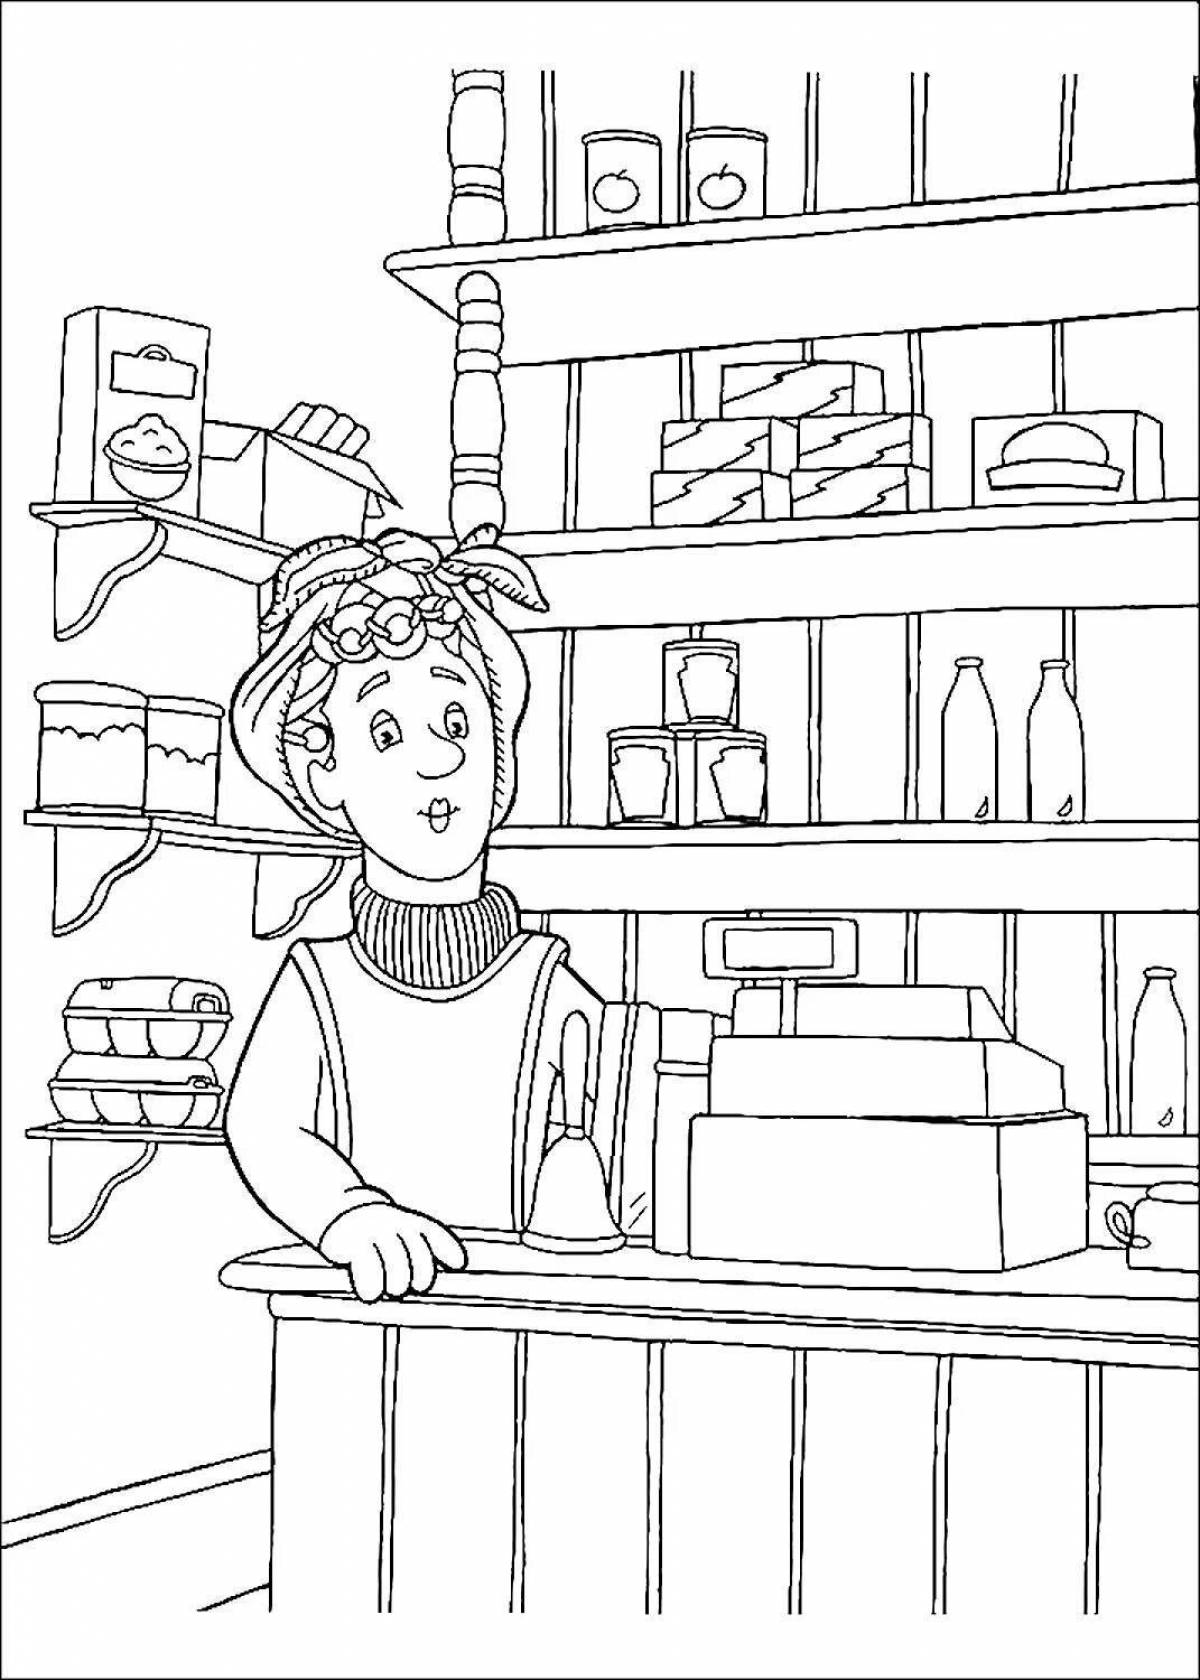 Coloring page of a fascinating sales profession